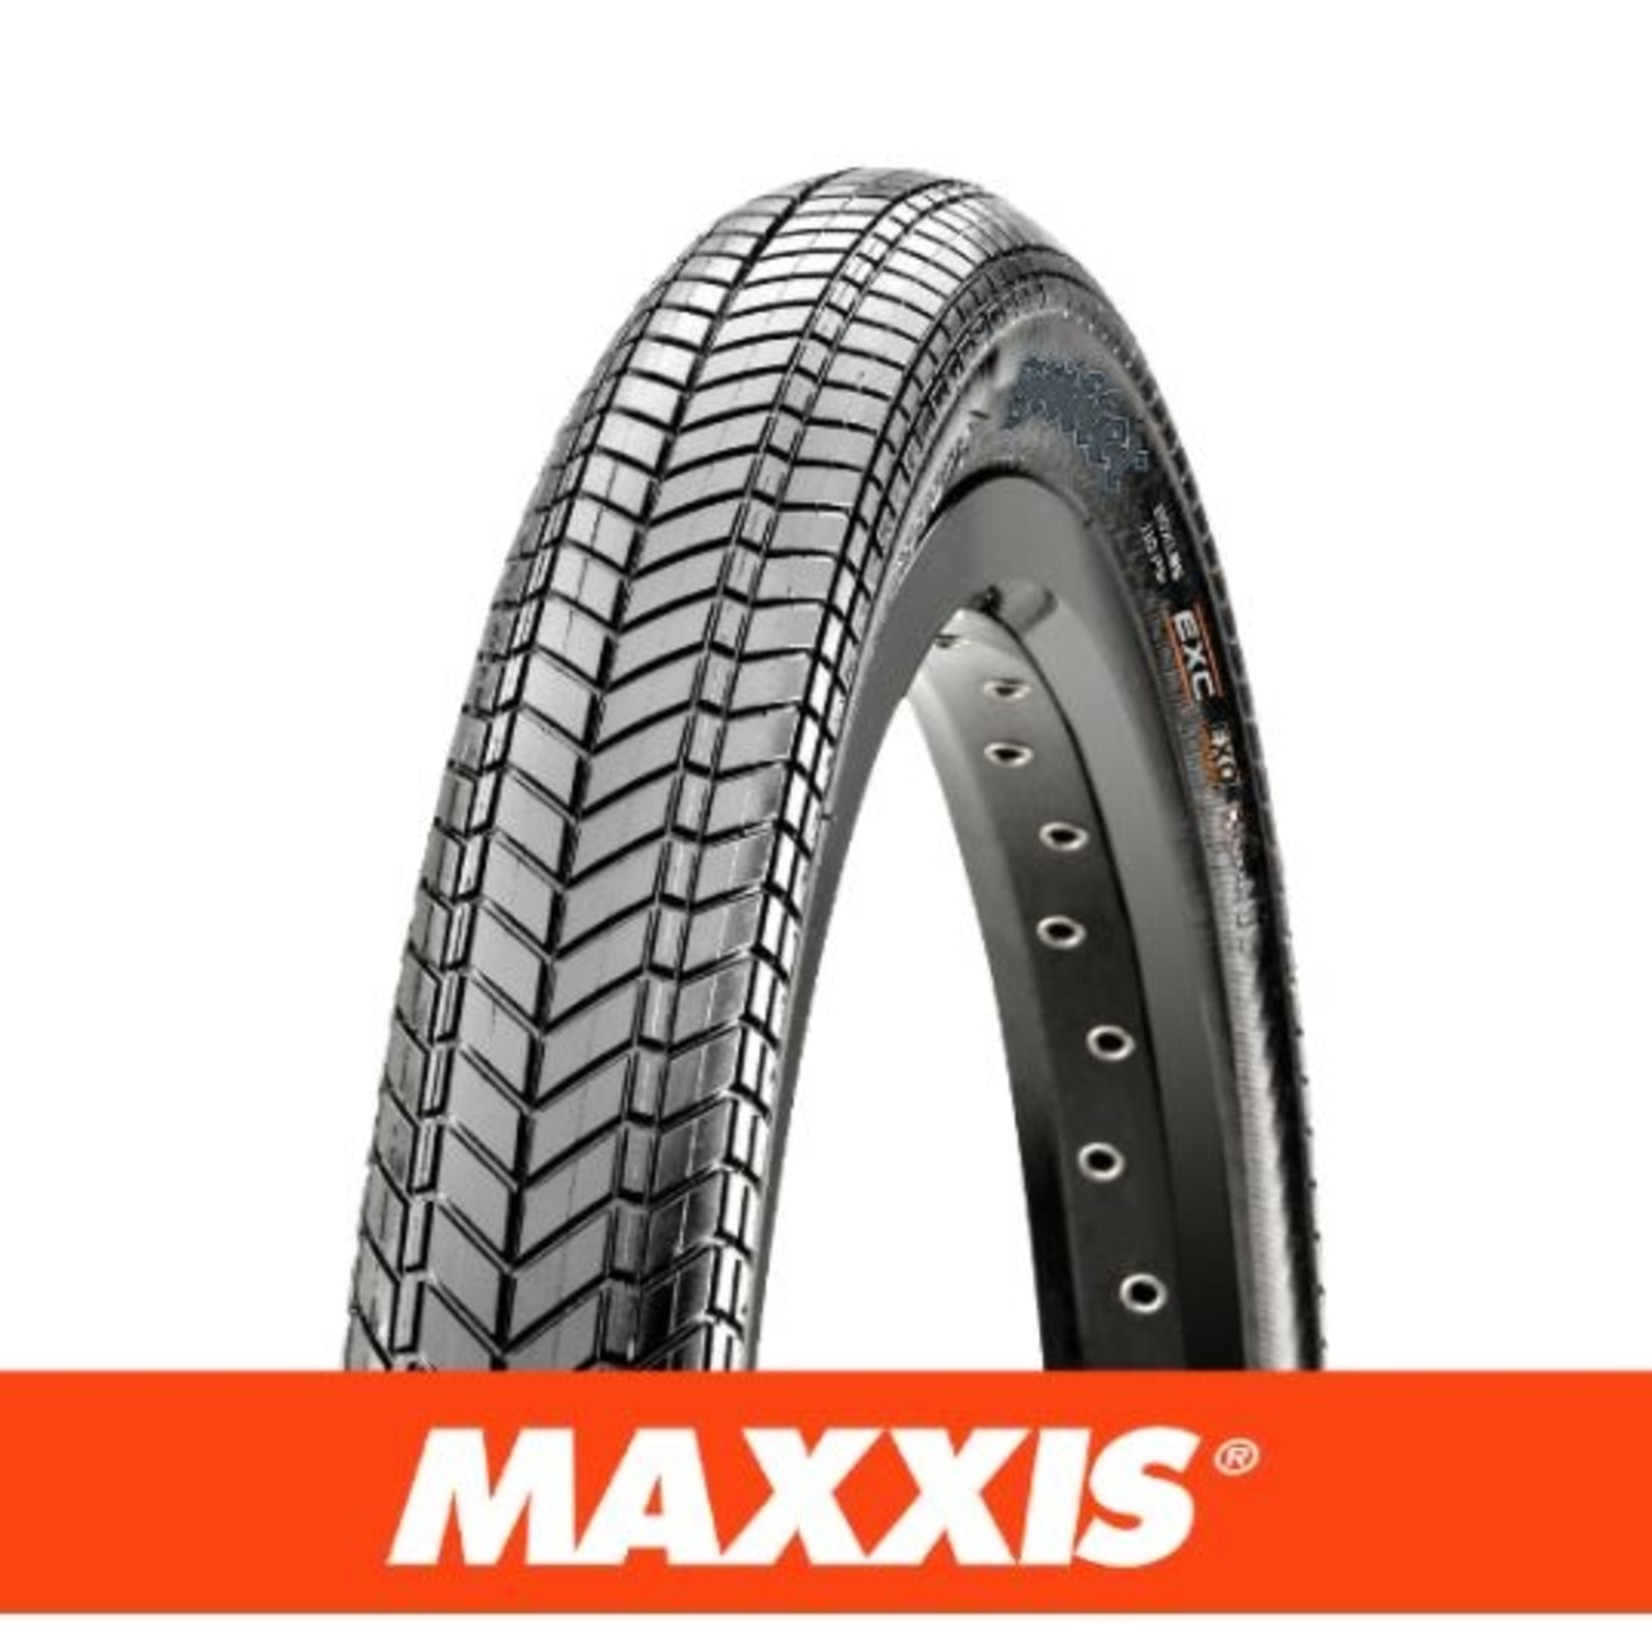 Maxxis Maxxis Grifter Bike Tyre - 20 X 2.30 - Folding Tyre 120T PI EXO - Pair